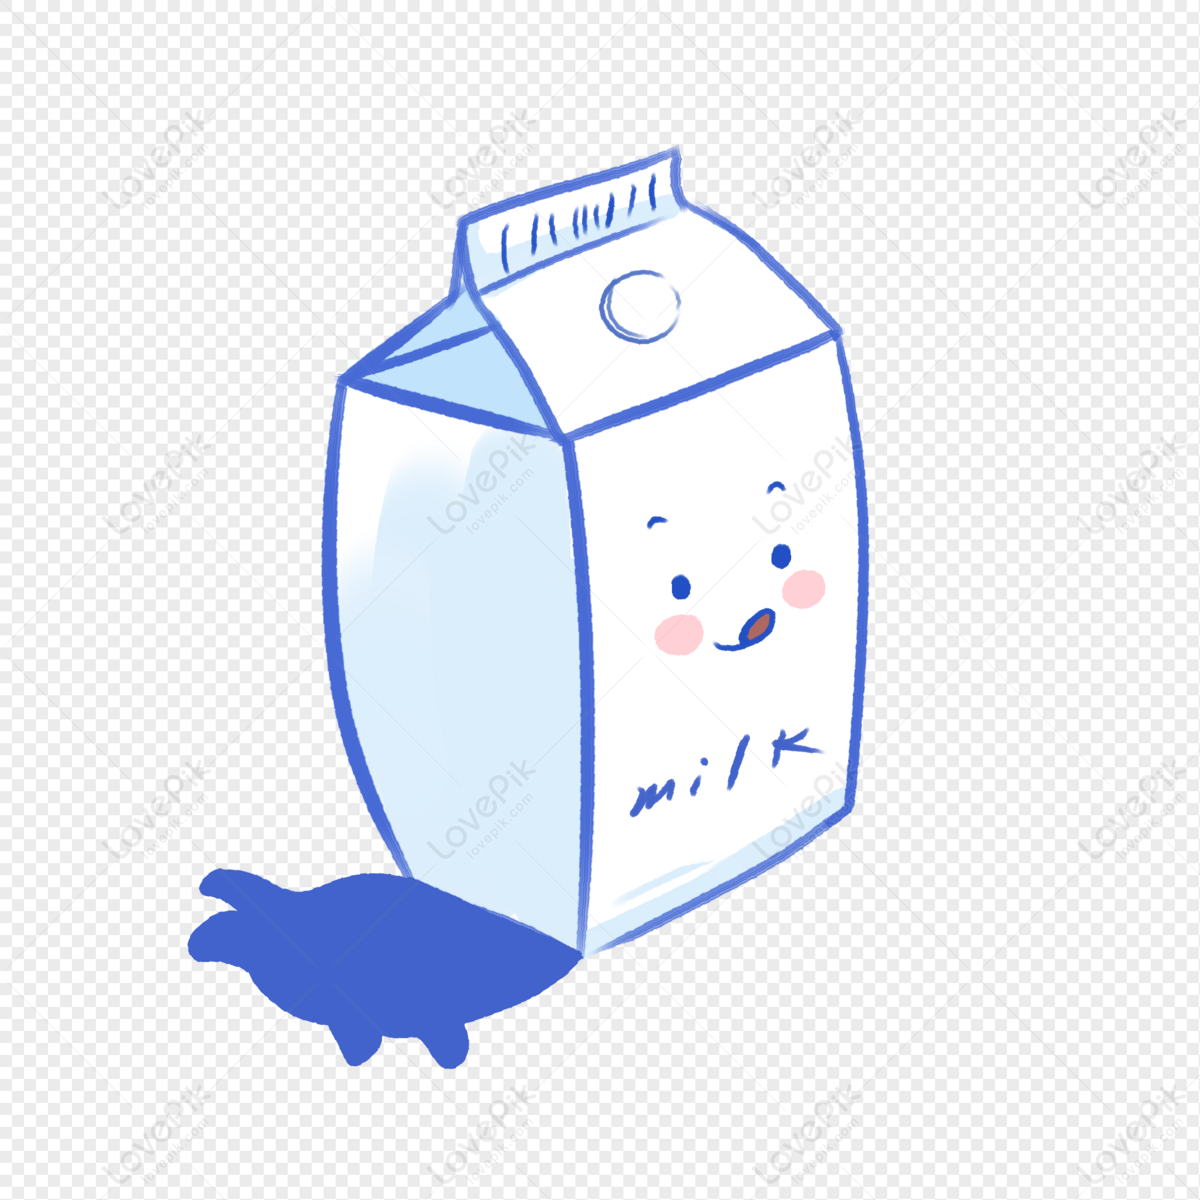 Cute Cartoon Milk Carton PNG White Transparent And Clipart Image For Free  Download - Lovepik | 401086382